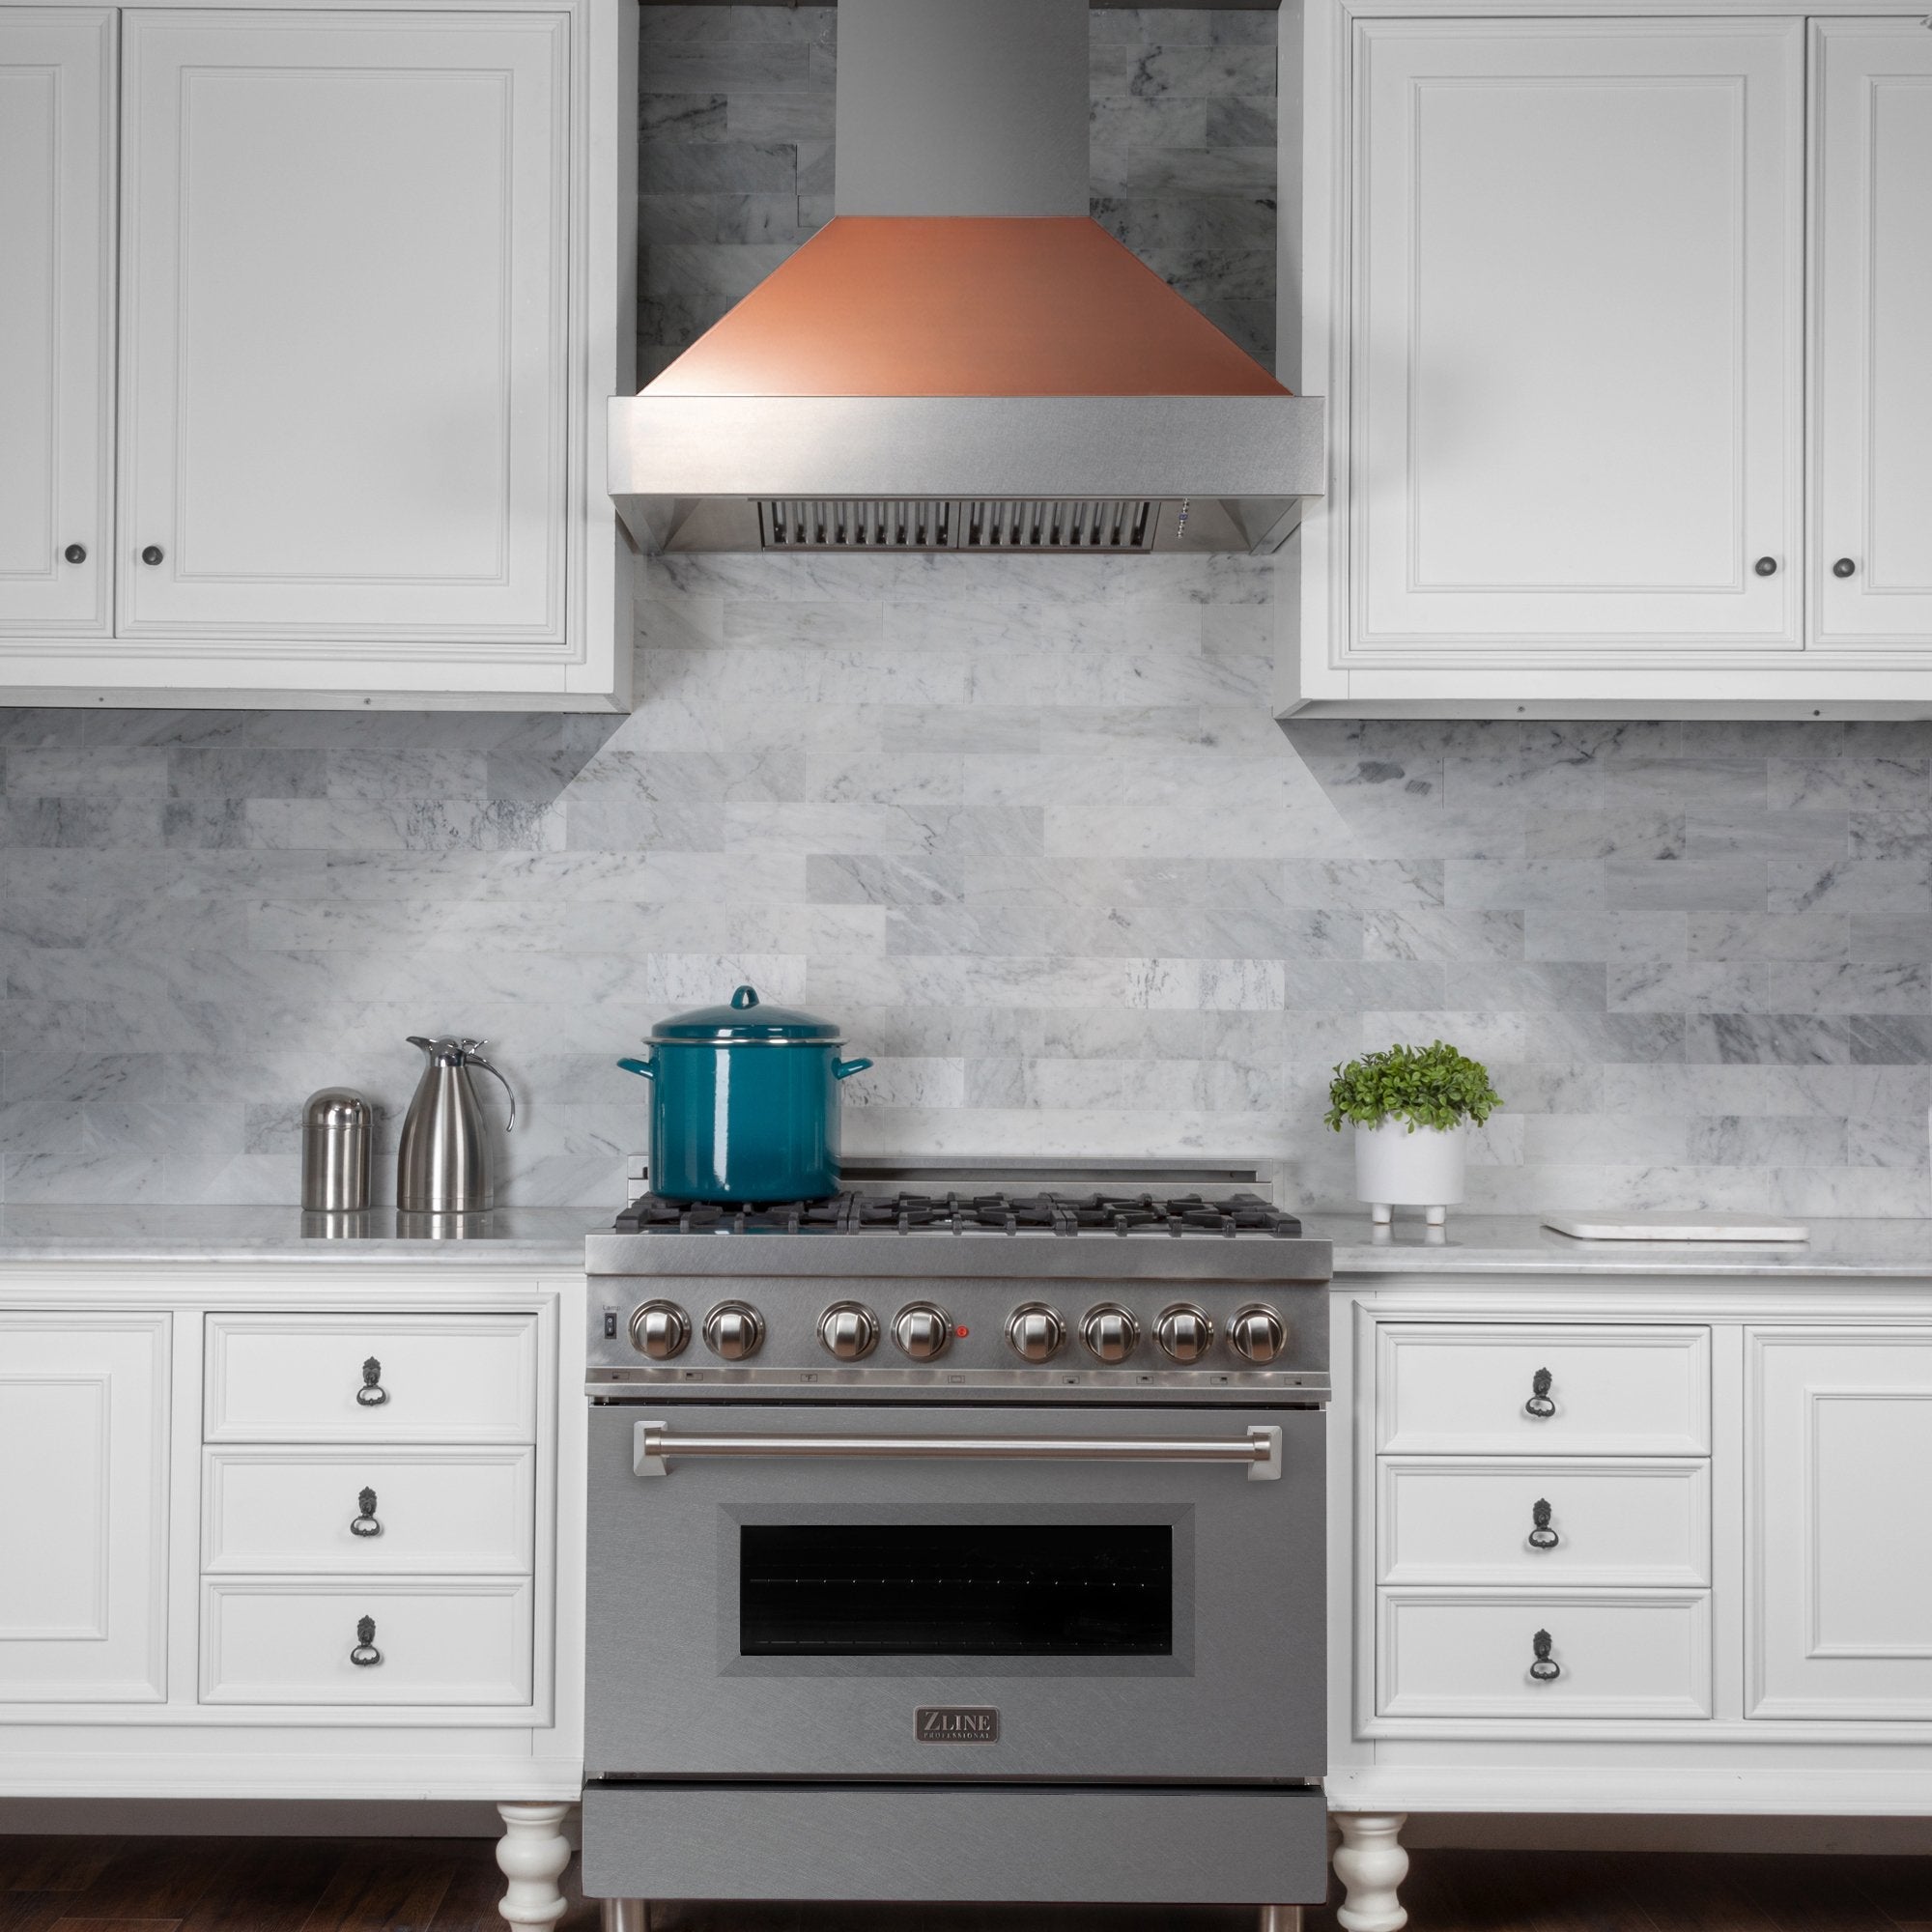 30" Ducted Fingerprint Resistant Stainless Steel Range Hood with Copper Shell (8654C-30)